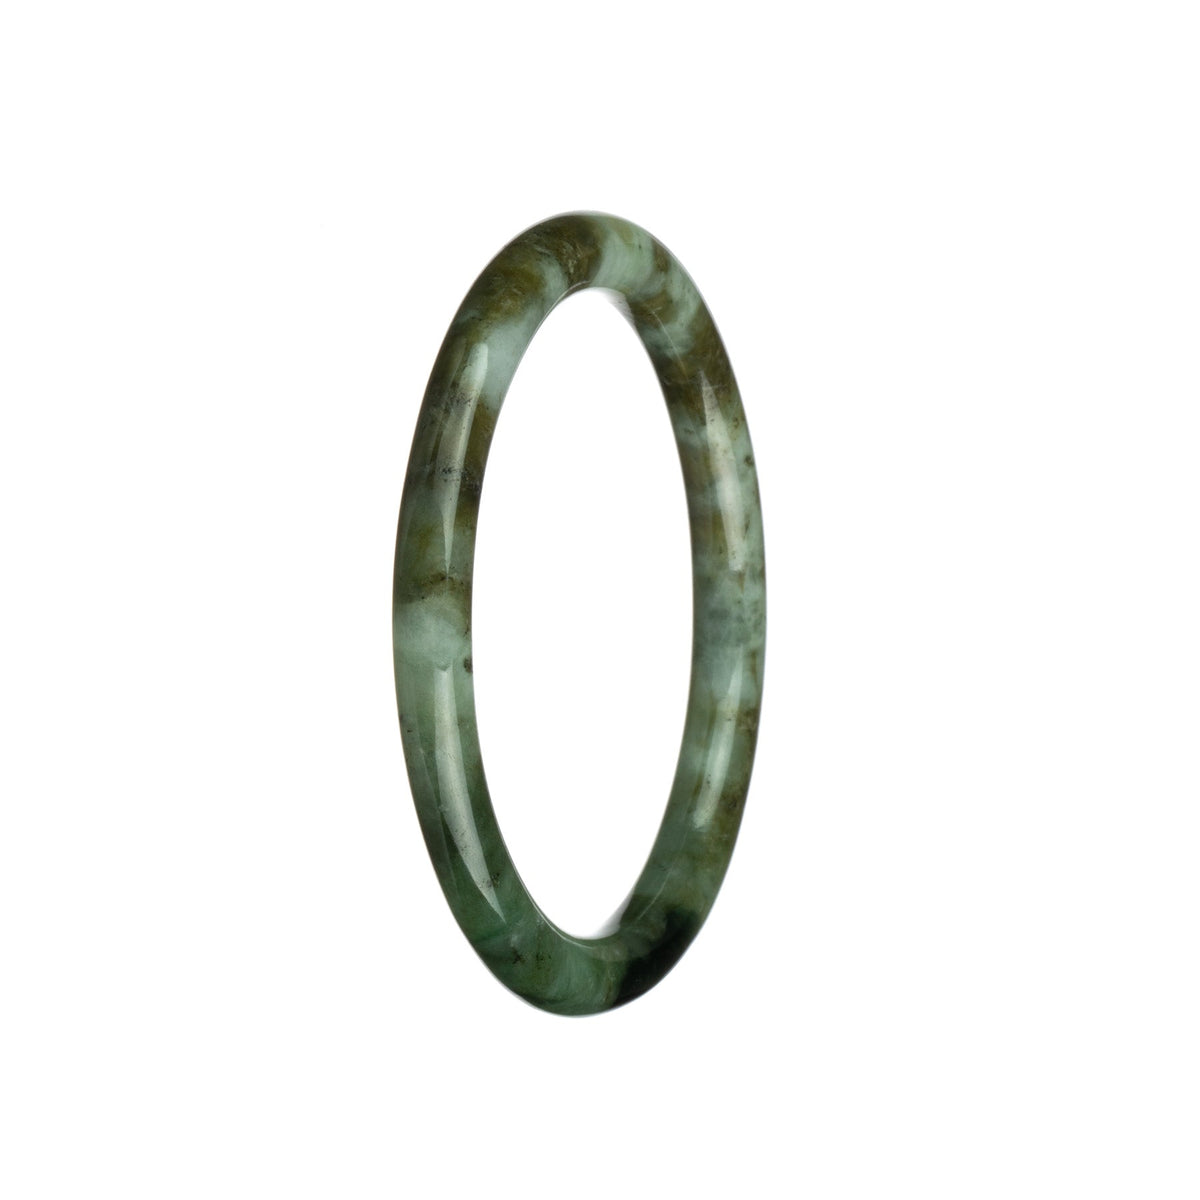 Genuine Type A Green Brown and White Pattern Jadeite Bangle - 61mm Petite Round